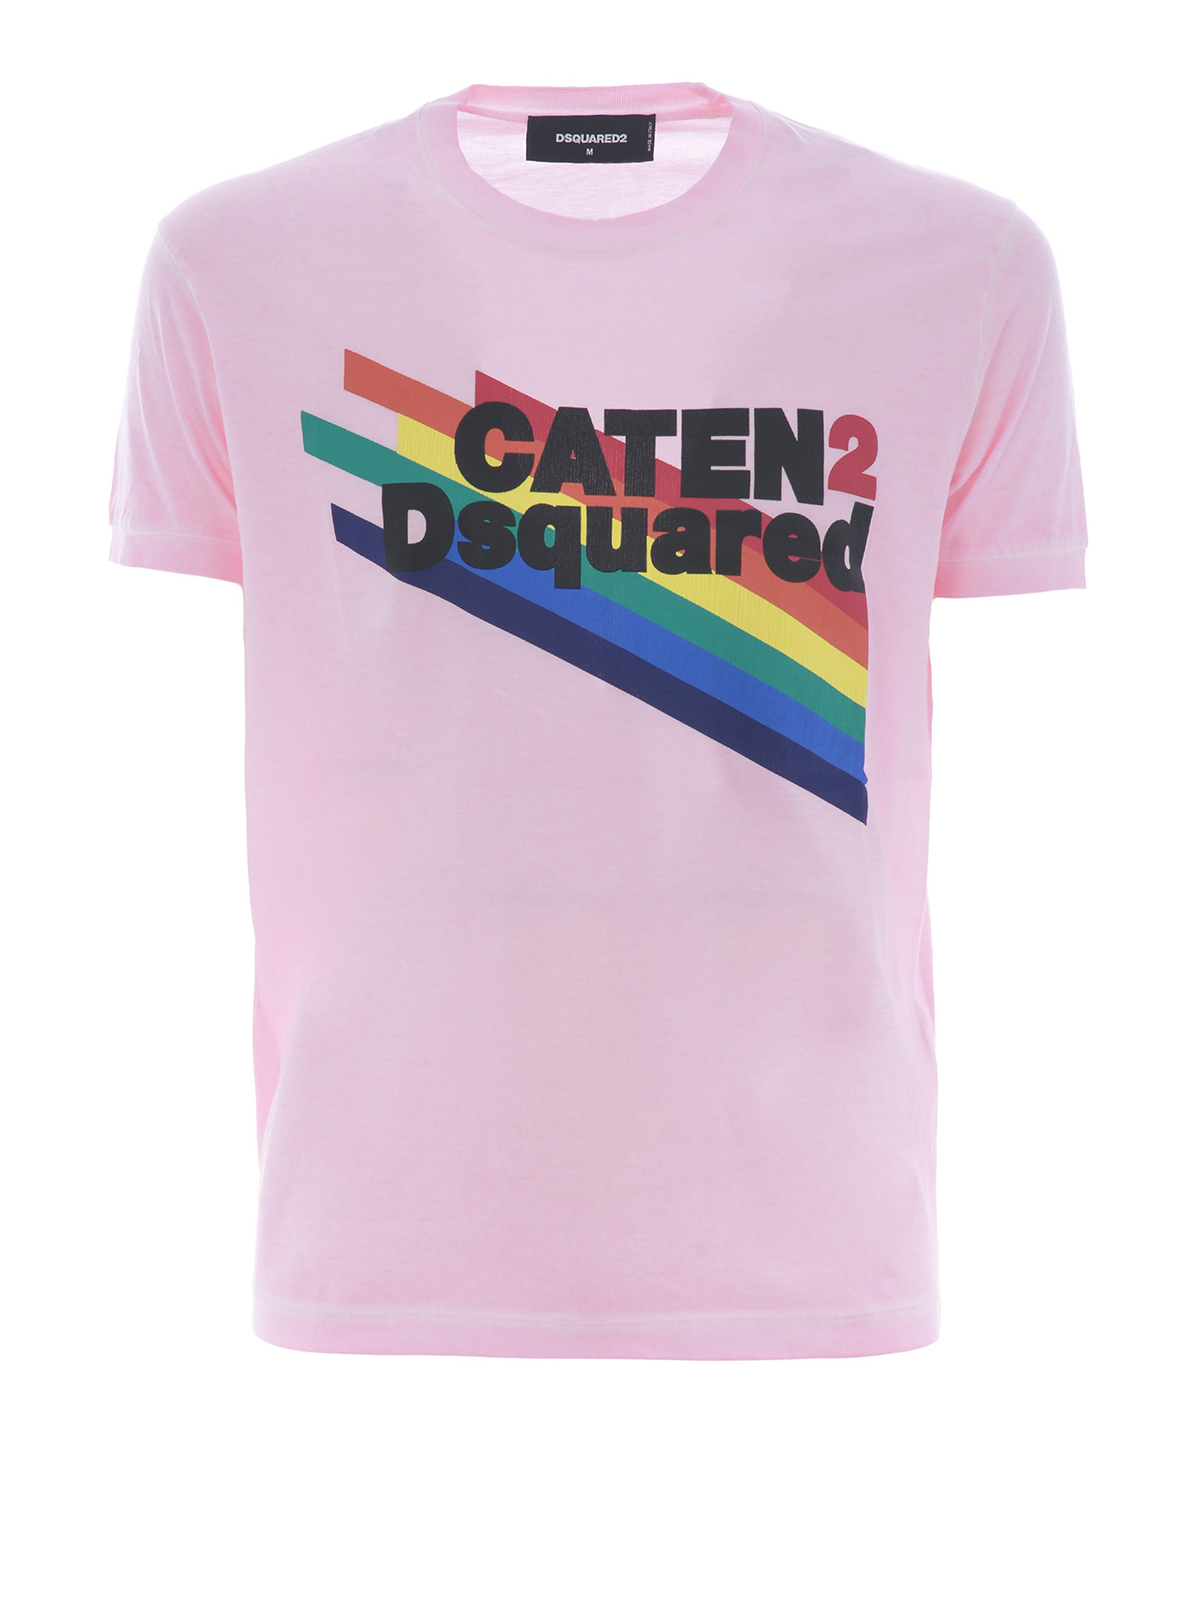 dsquared2 t shirt pink